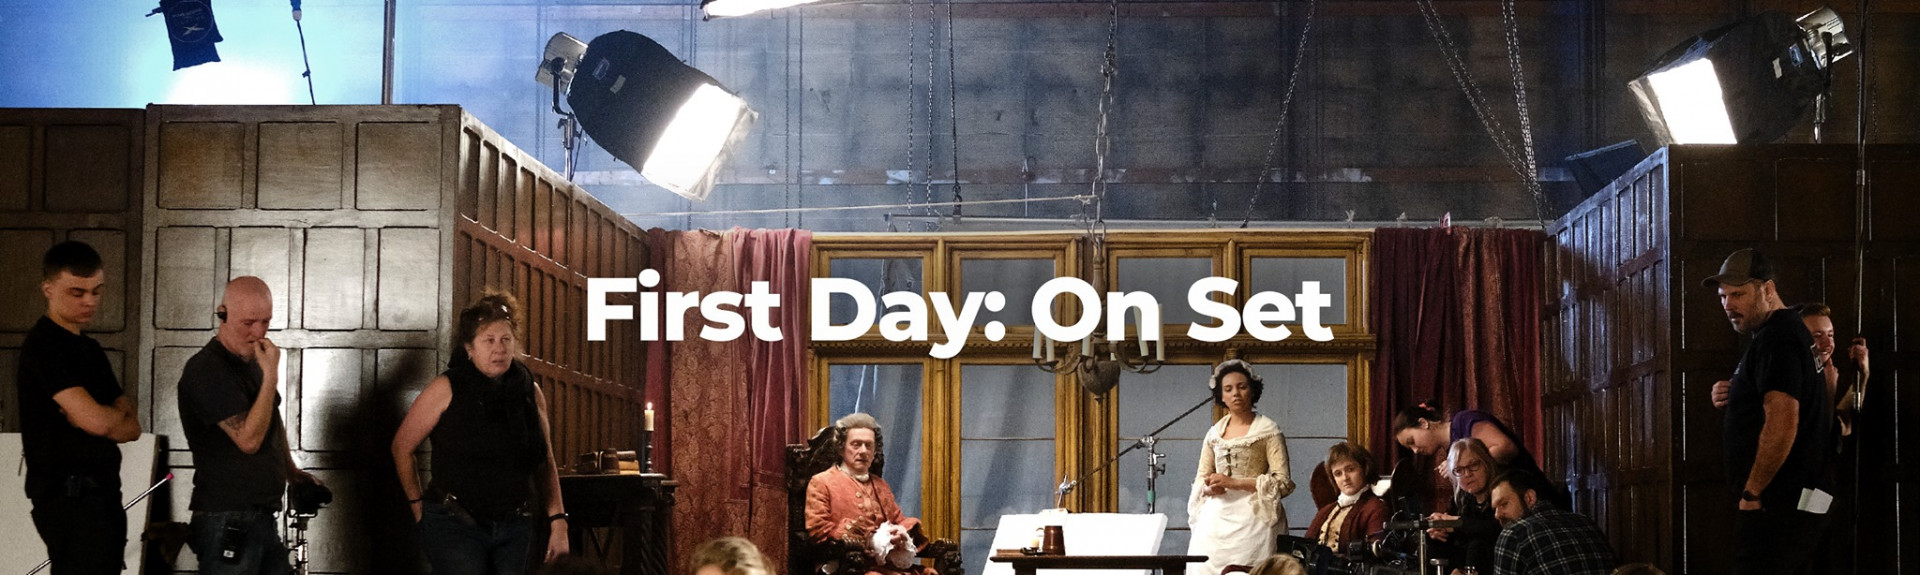 First Day: On Set